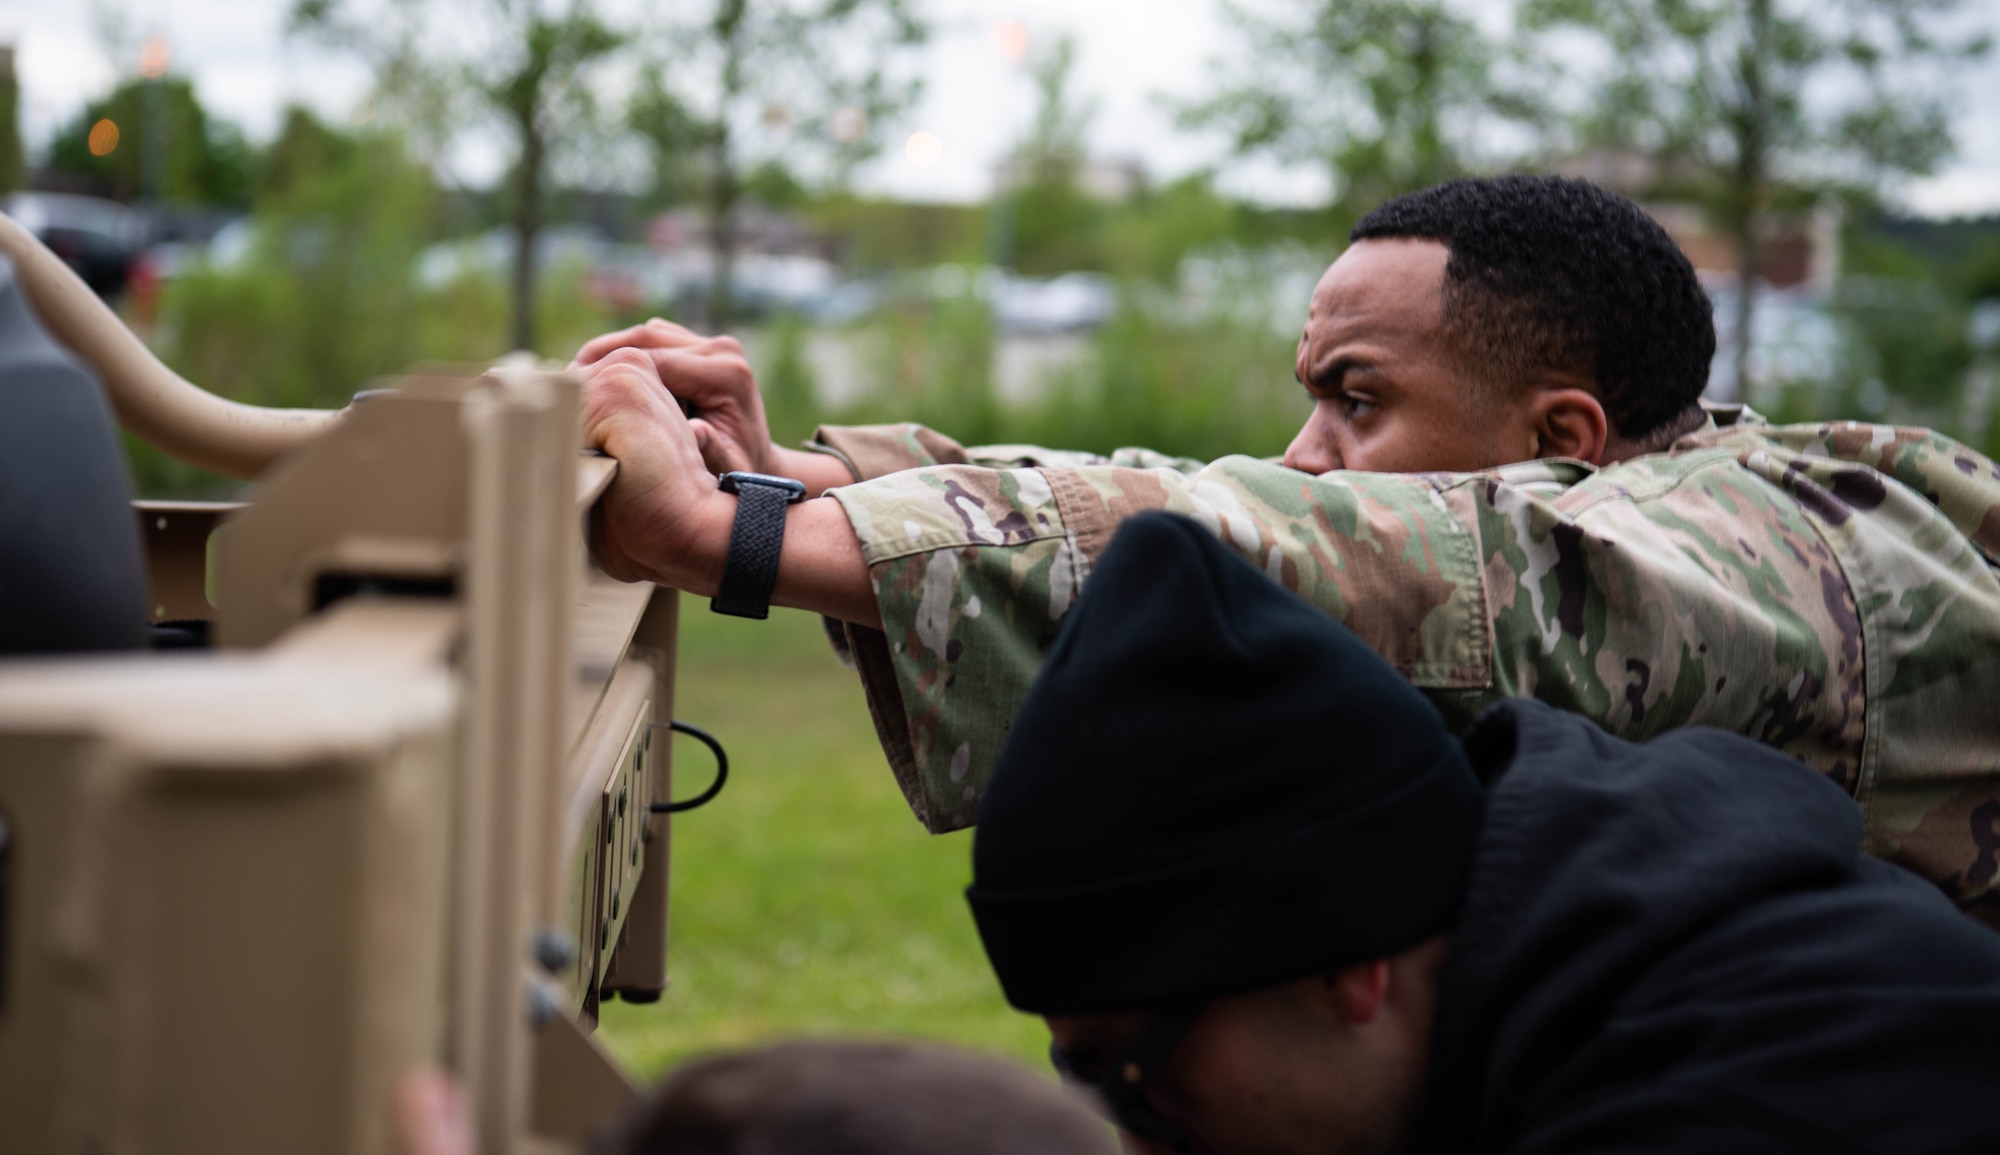 U.S. Air Force Airmen assigned to the 86th Security Forces Squadron, push a Polaris RZR vehicle during a Police Week event at Ramstein Air Base, Germany, May 16, 2023. The Defender Challenge consisted of a timed ruck, a log press and carry, a downed vehicle push, combat life-saver training and a scavenger hunt. (U.S. Air Force photo by Airman 1st Class Jared Lovett)